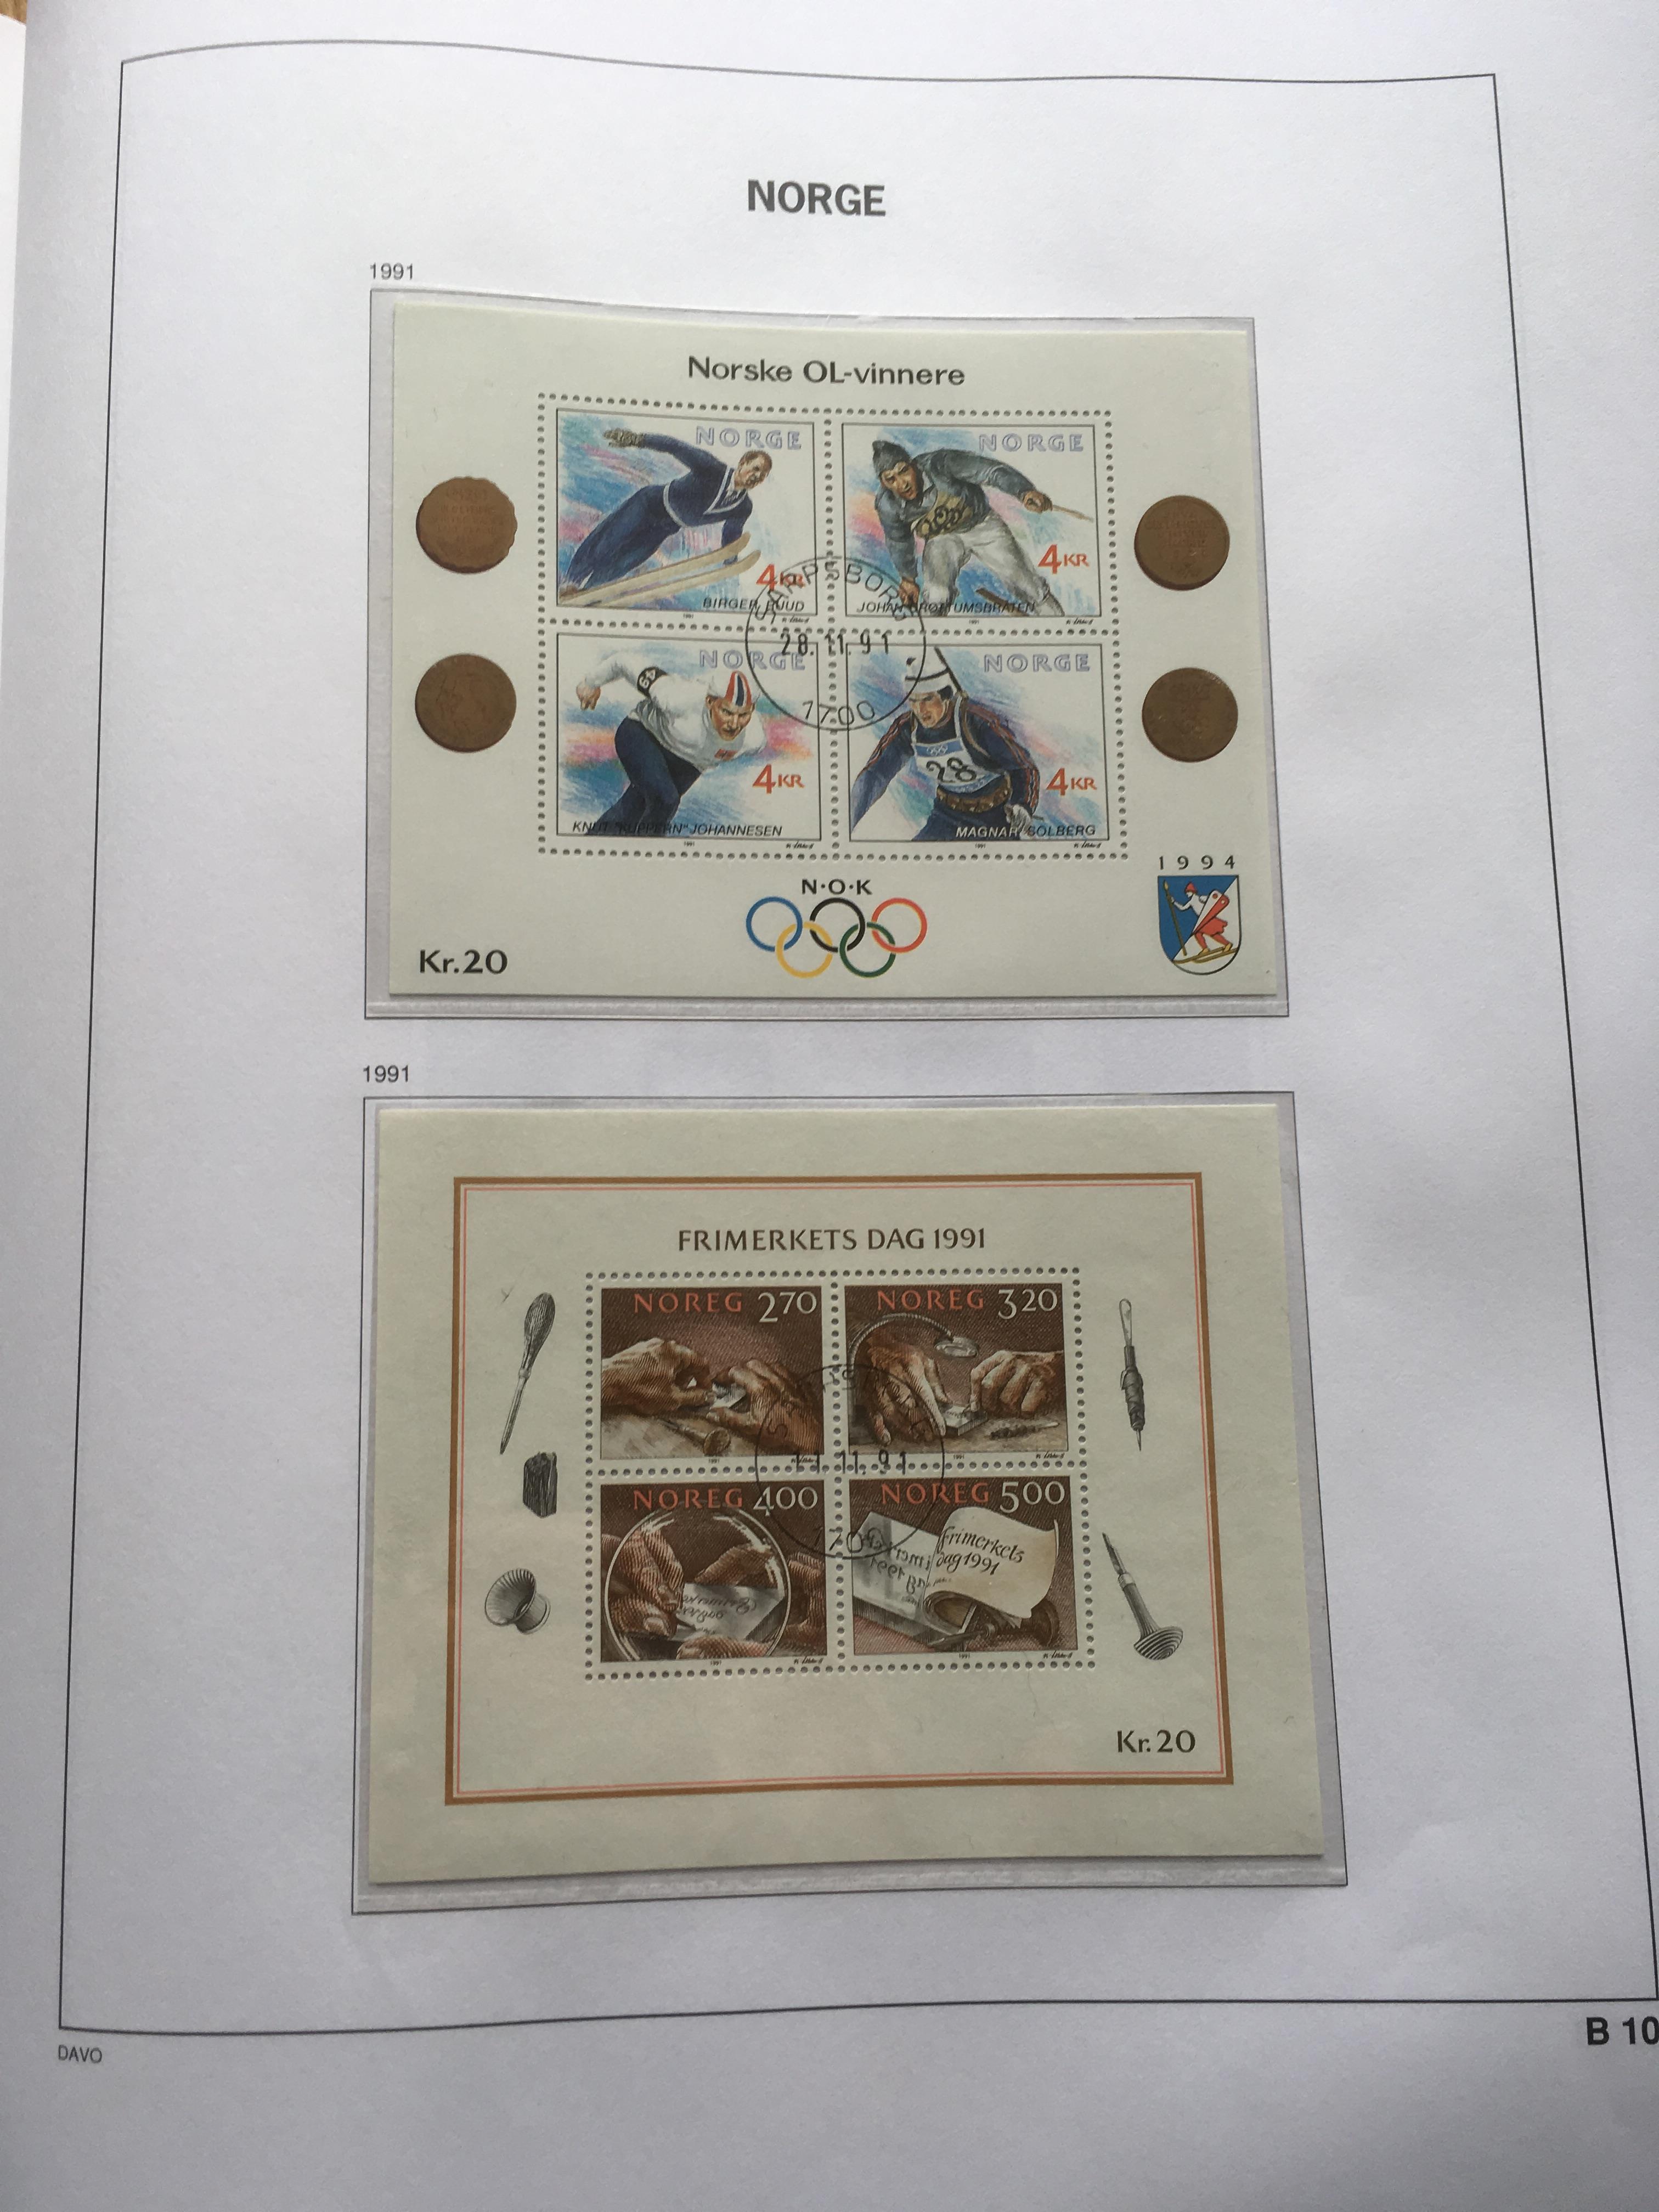 NORWAY: A COLLECTION TO 2016 IN TWO DAVO ALBUMS WITH 2000-2014 LARGELY COMPLETE, MINISHEETS, - Image 9 of 9